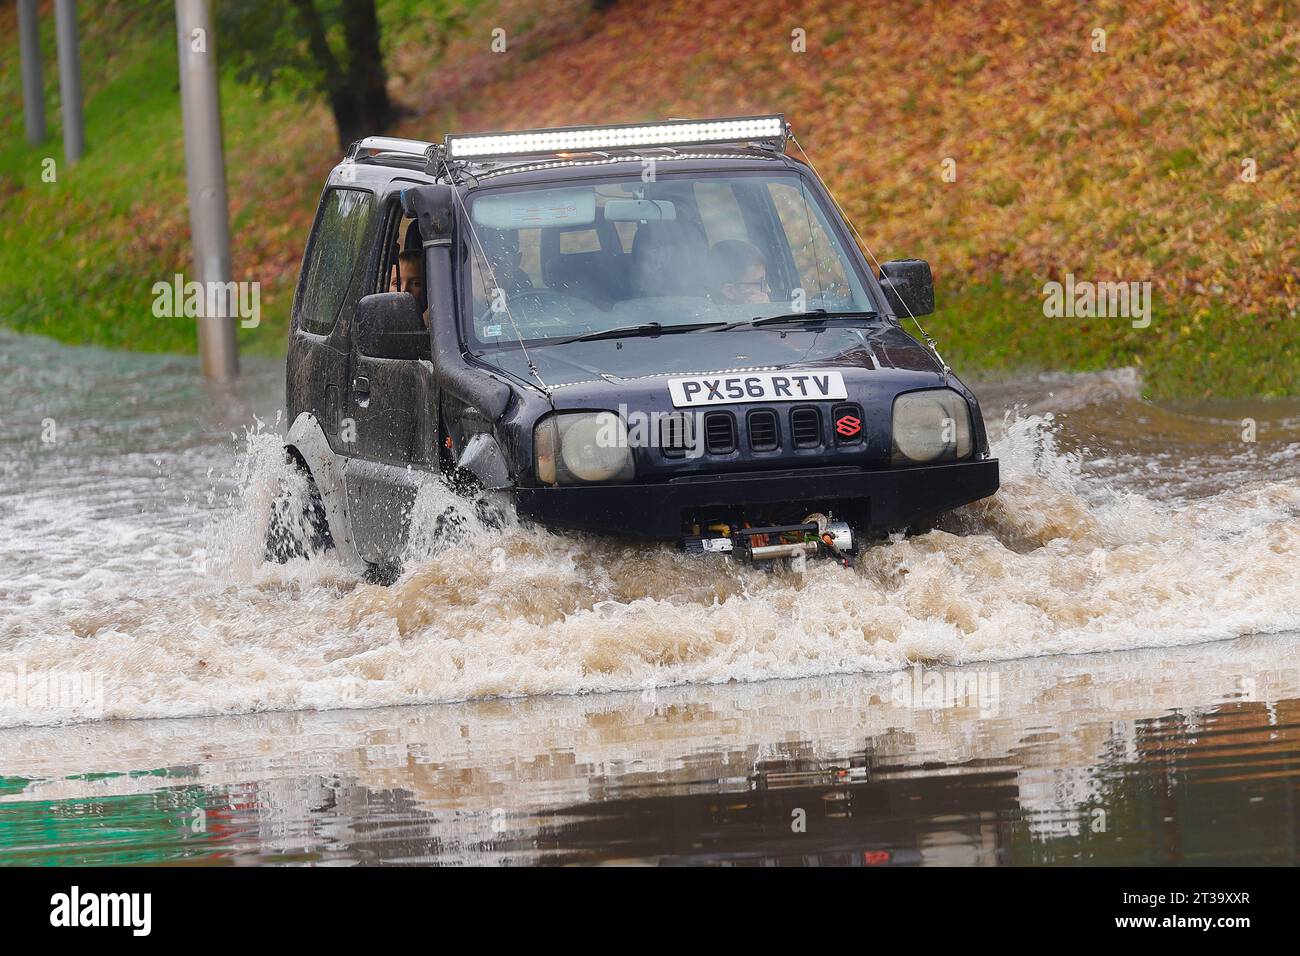 21st October Storm Babet flooding onStation Road  in Allerton Bywater,West Yorkshire,UK Stock Photo